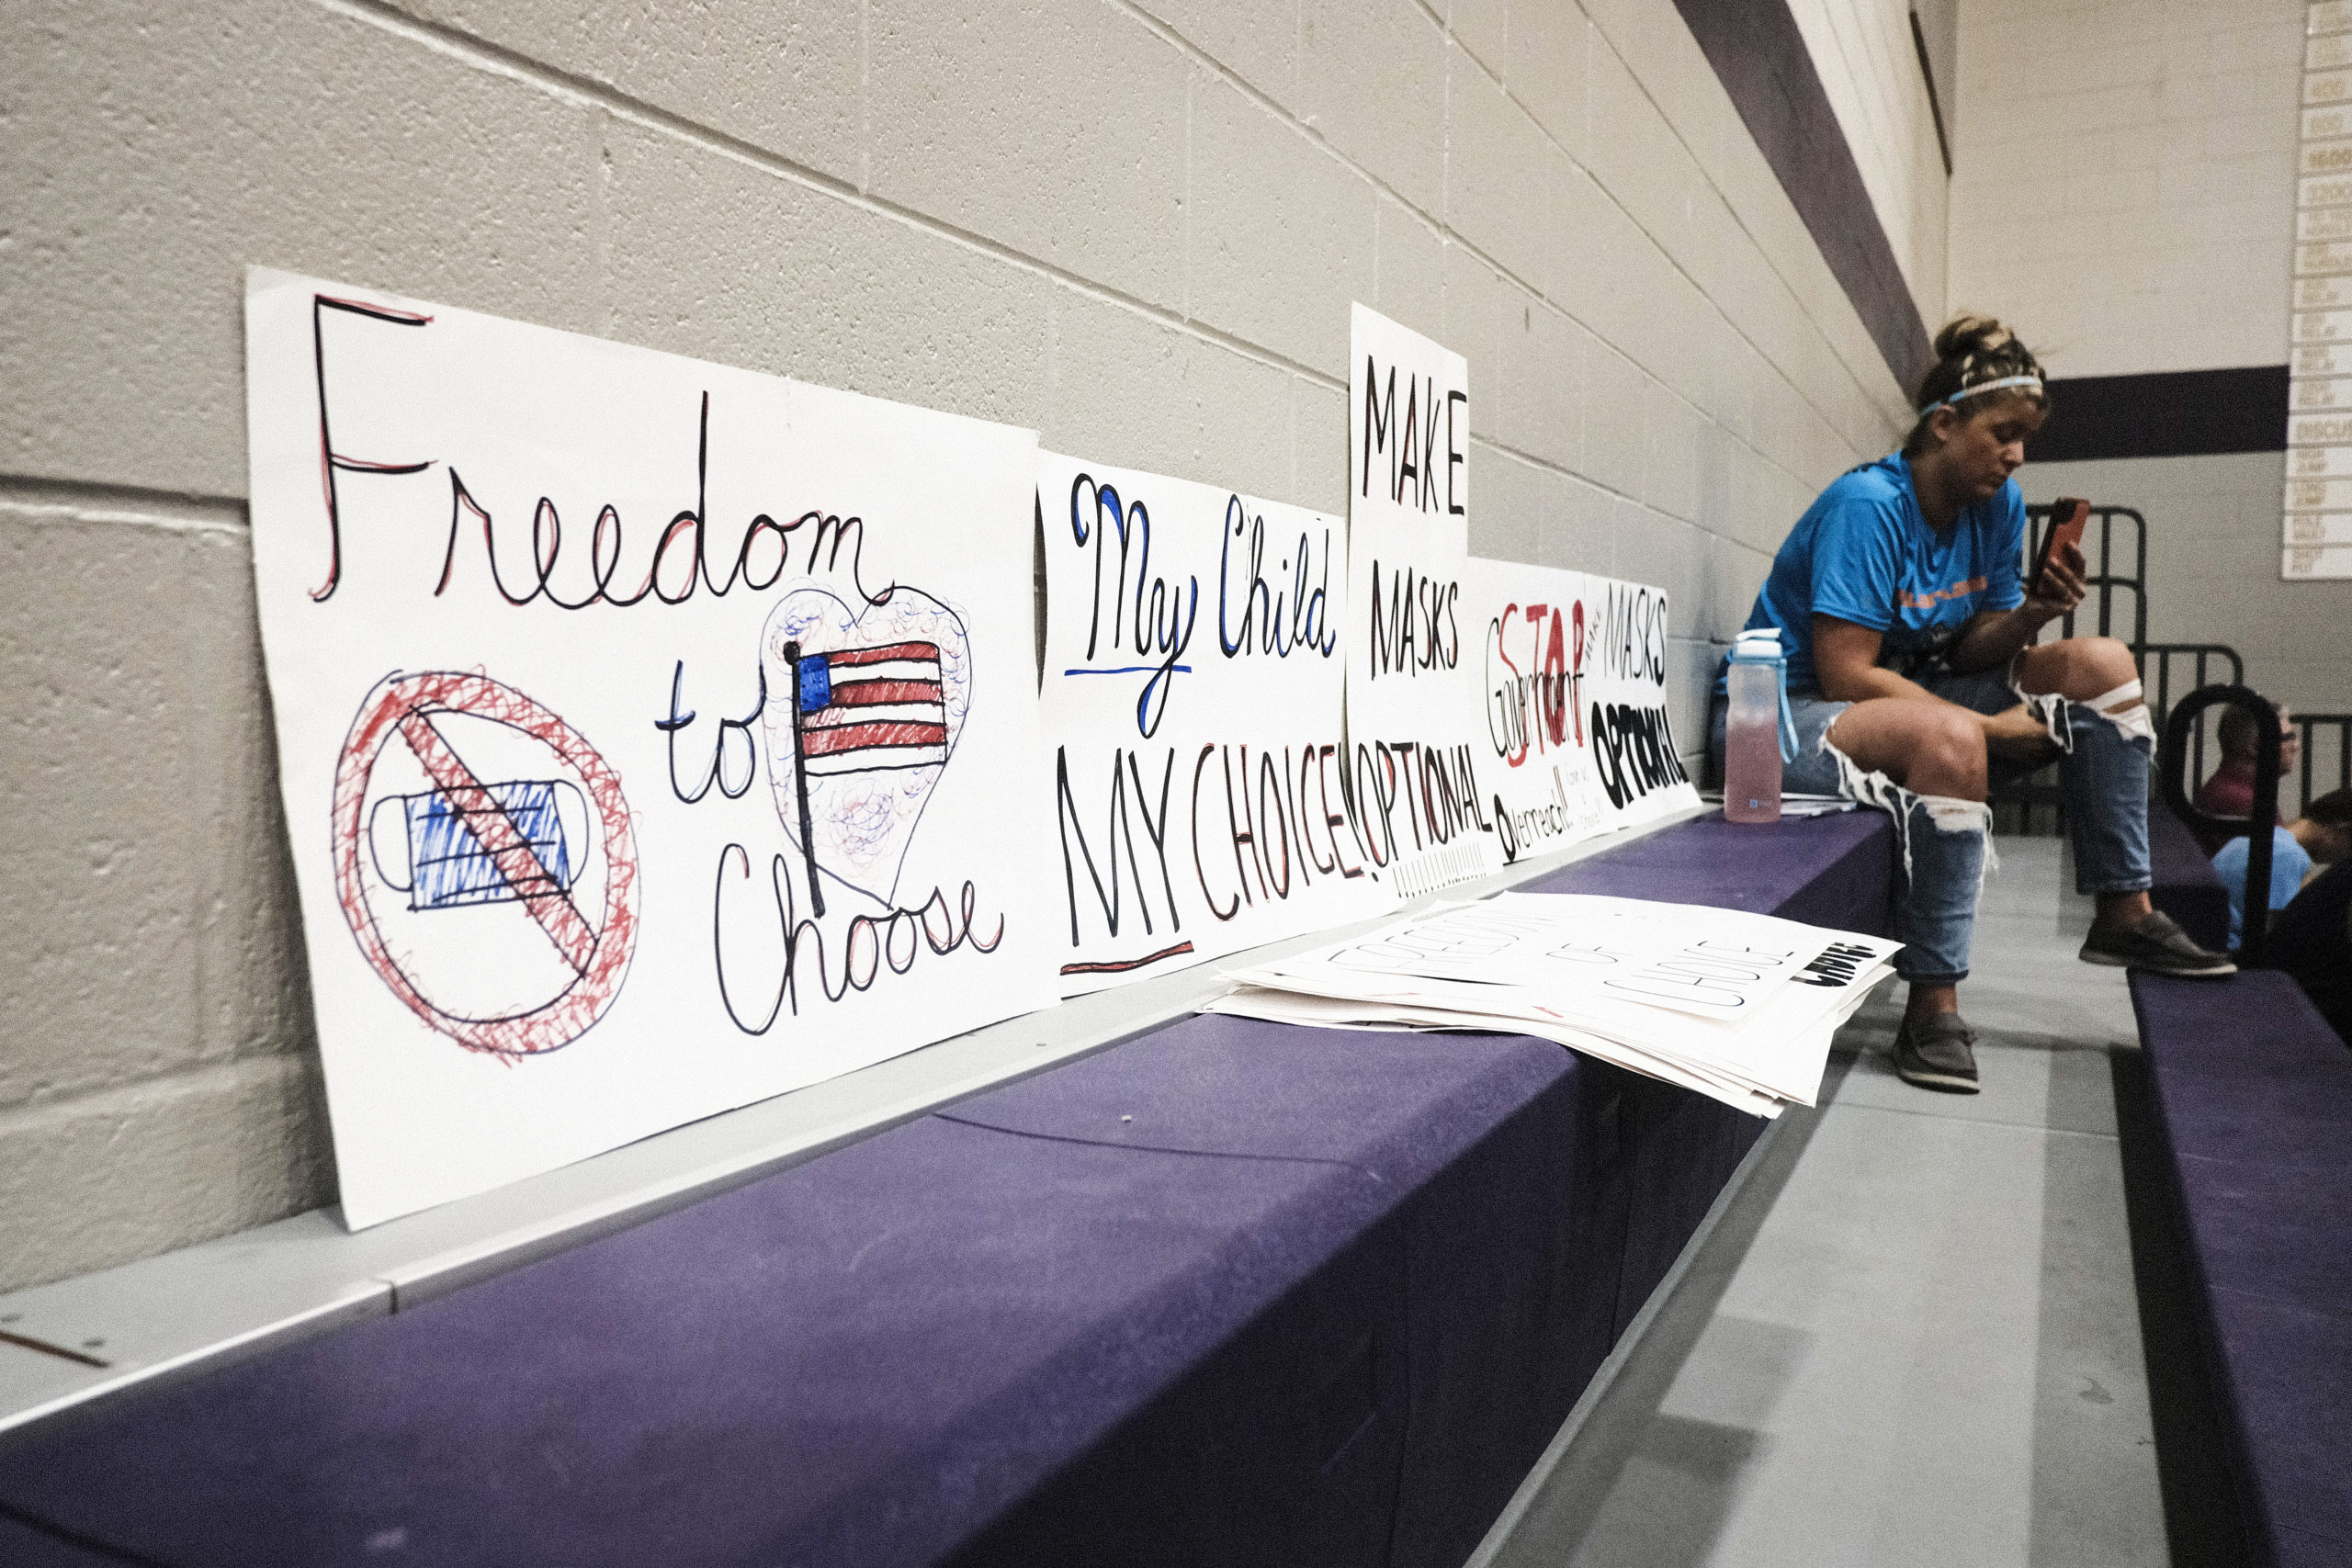 An attendee sits next to anti-vaccine mandate signs at a special Board of Education Meeting on mask mandates for students and staff in Kalamazoo County Schools at the Schoolcraft High School Gymnasium on August 23, 2021 in Schoolcraft, Michigan. The Schoolcraft Local School District opened the floor for public discussion. (Photo by Matthew Hatcher/Getty Images)